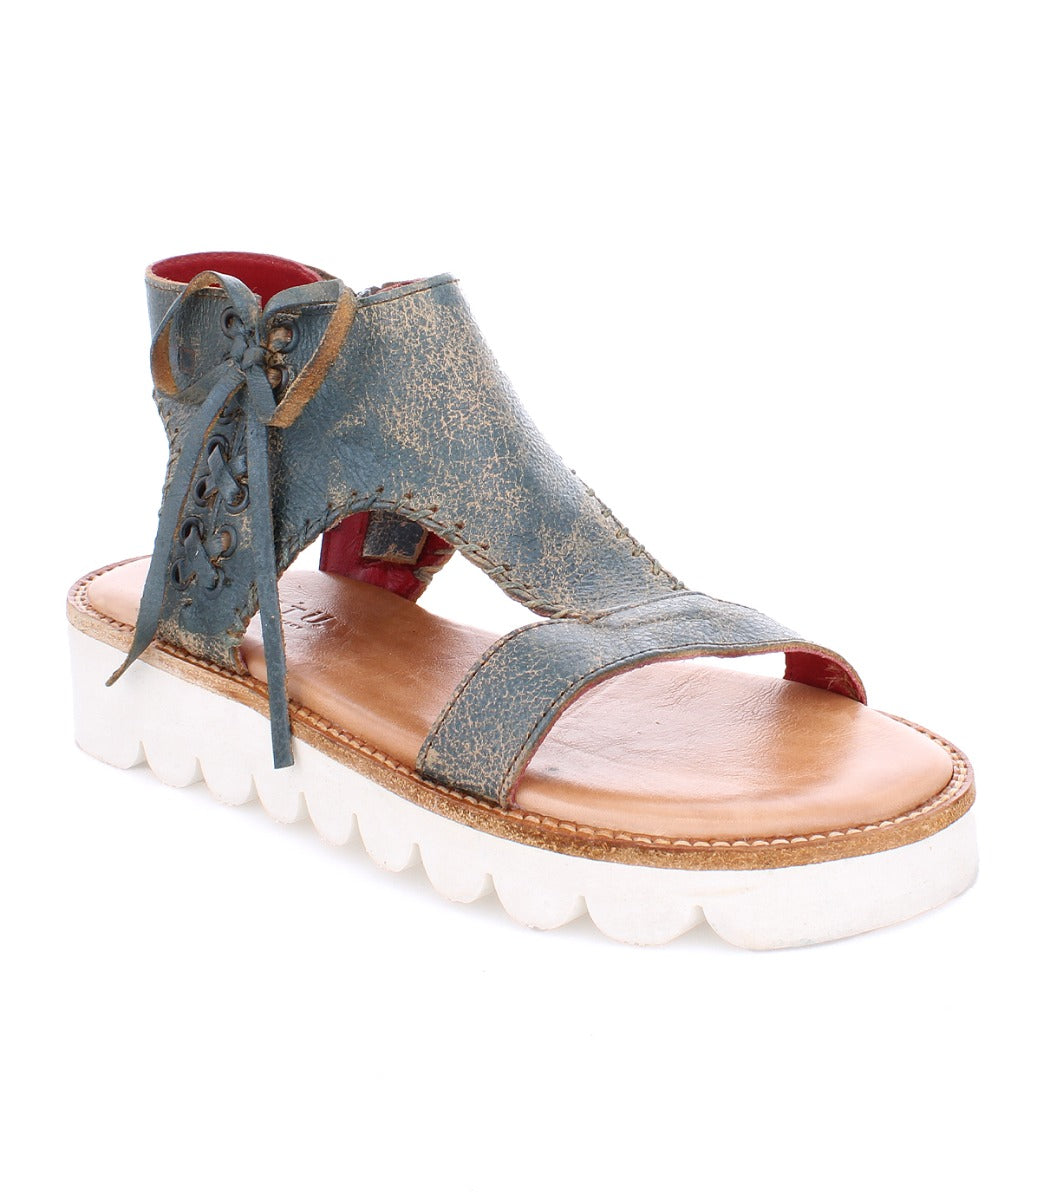 A women's blue leather sandal with white soles, the Zoe II by Bed Stu.